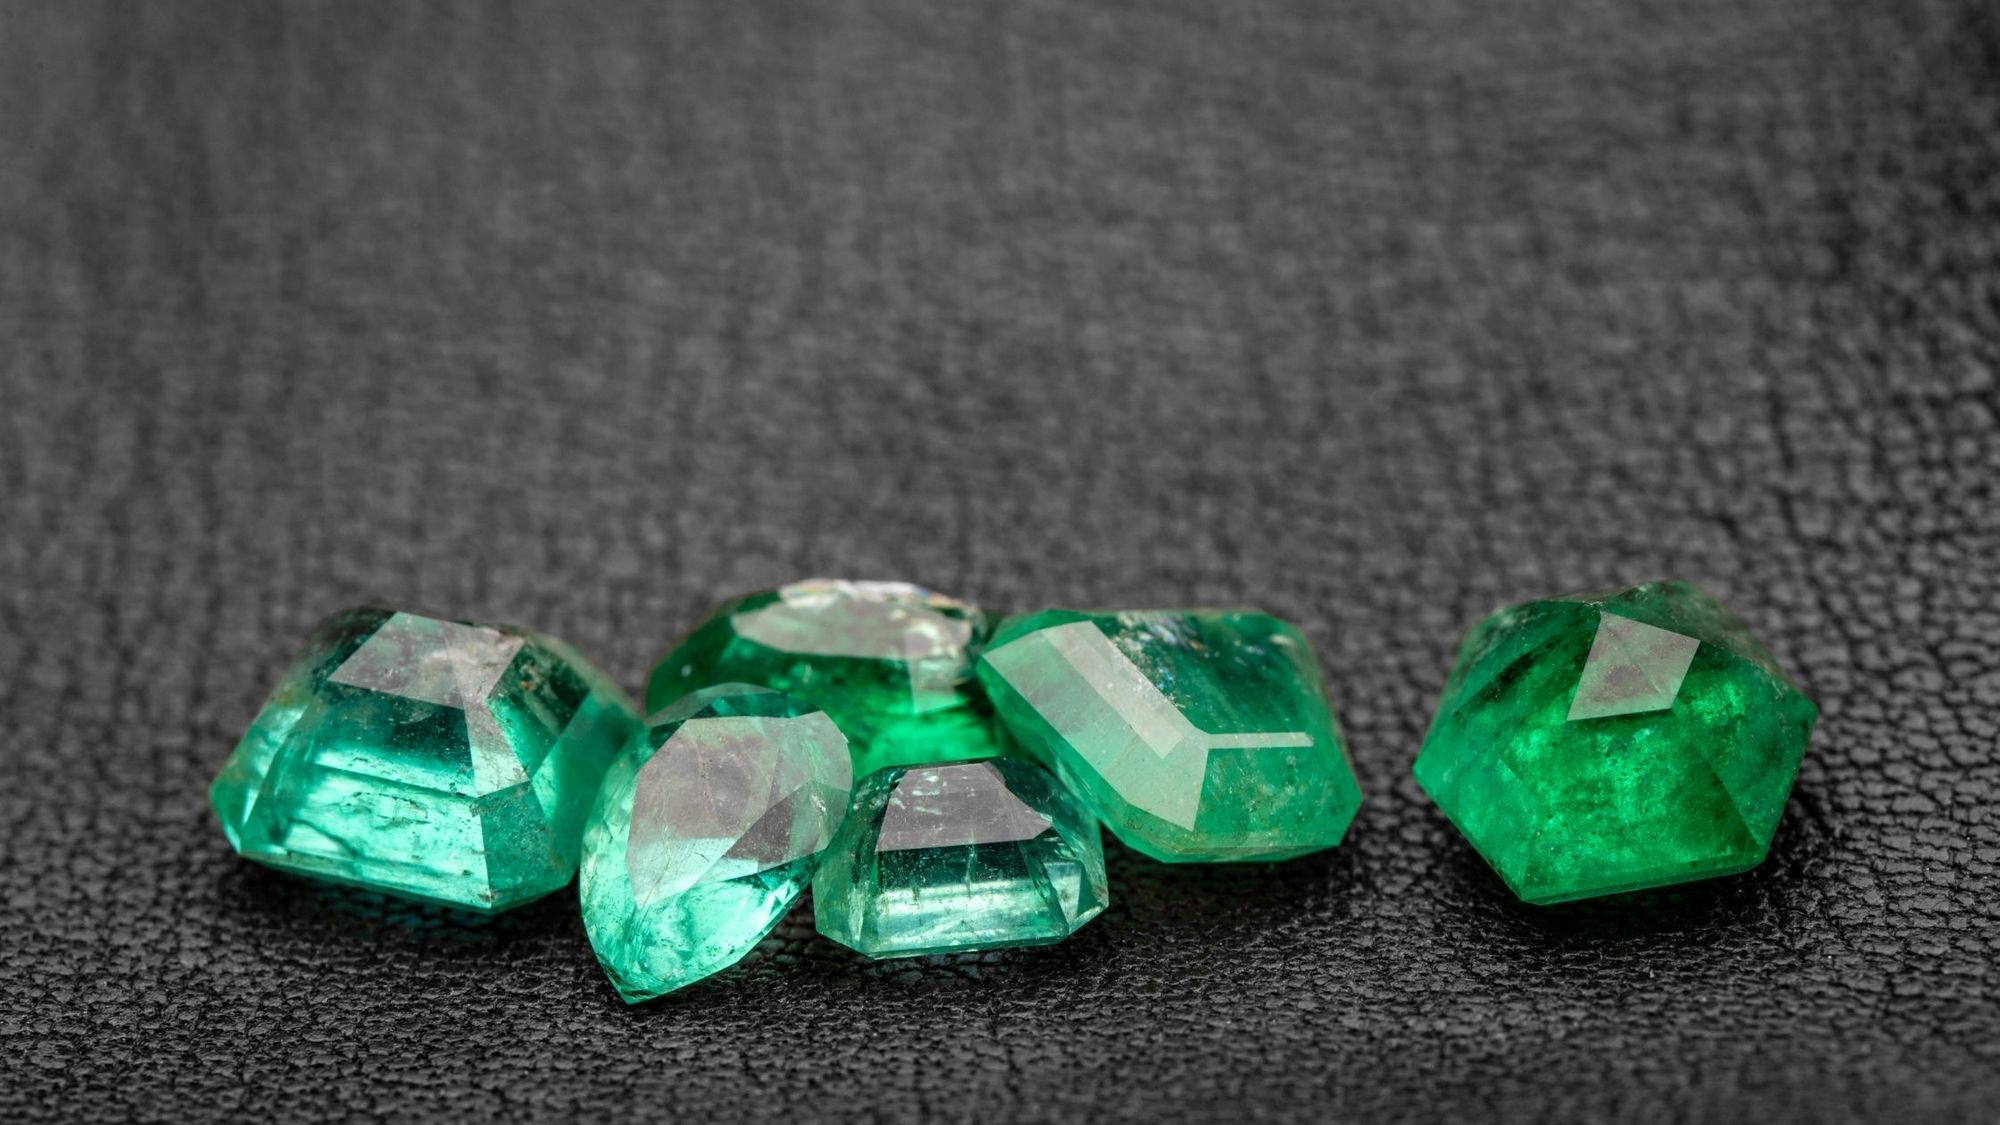 Emerald Stone - What are the benefits of Emerald Stone?